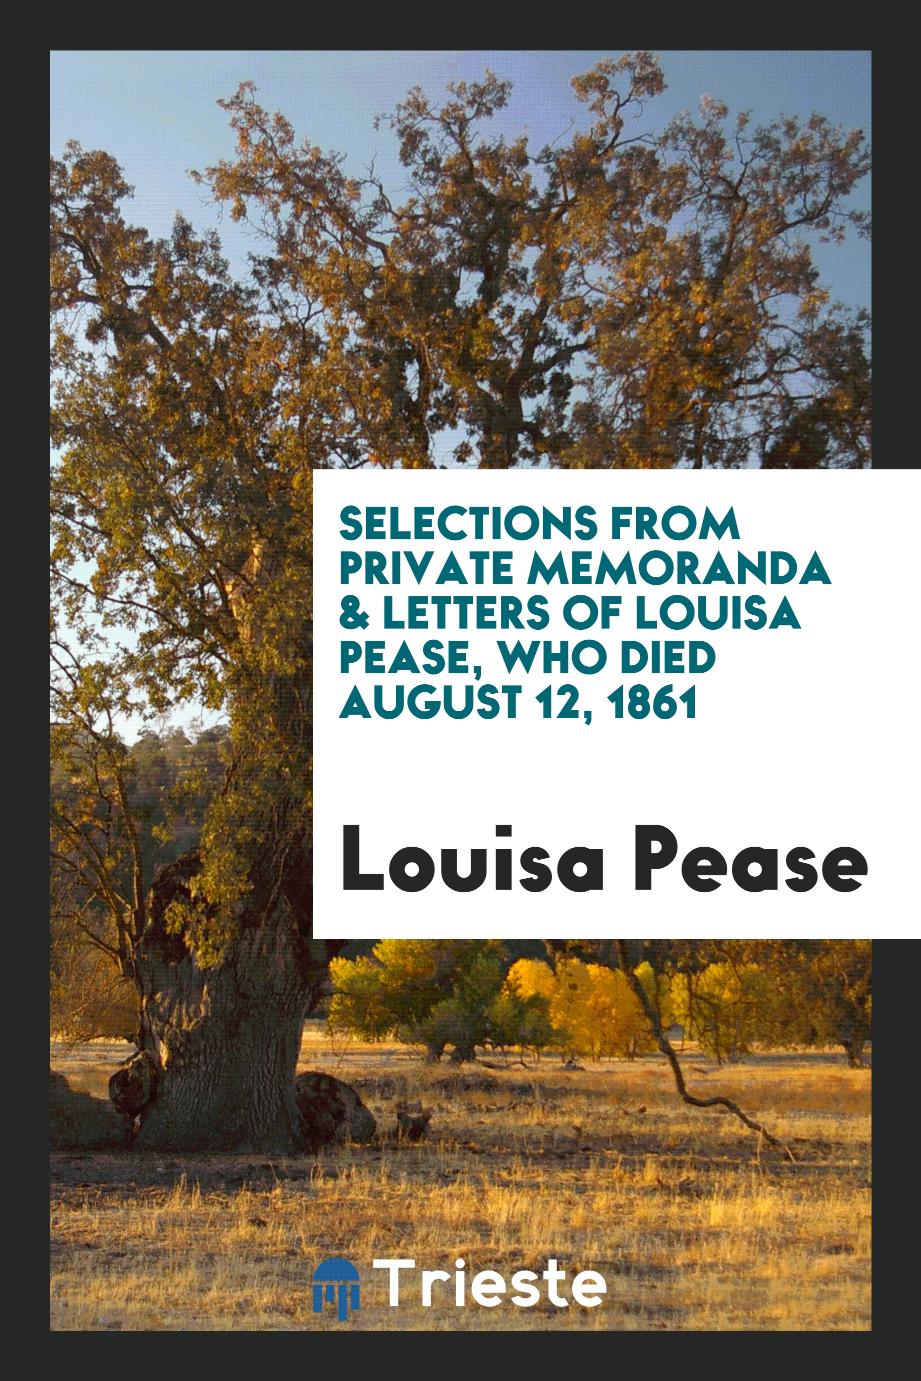 Selections from private memoranda & letters of Louisa Pease, who died August 12, 1861